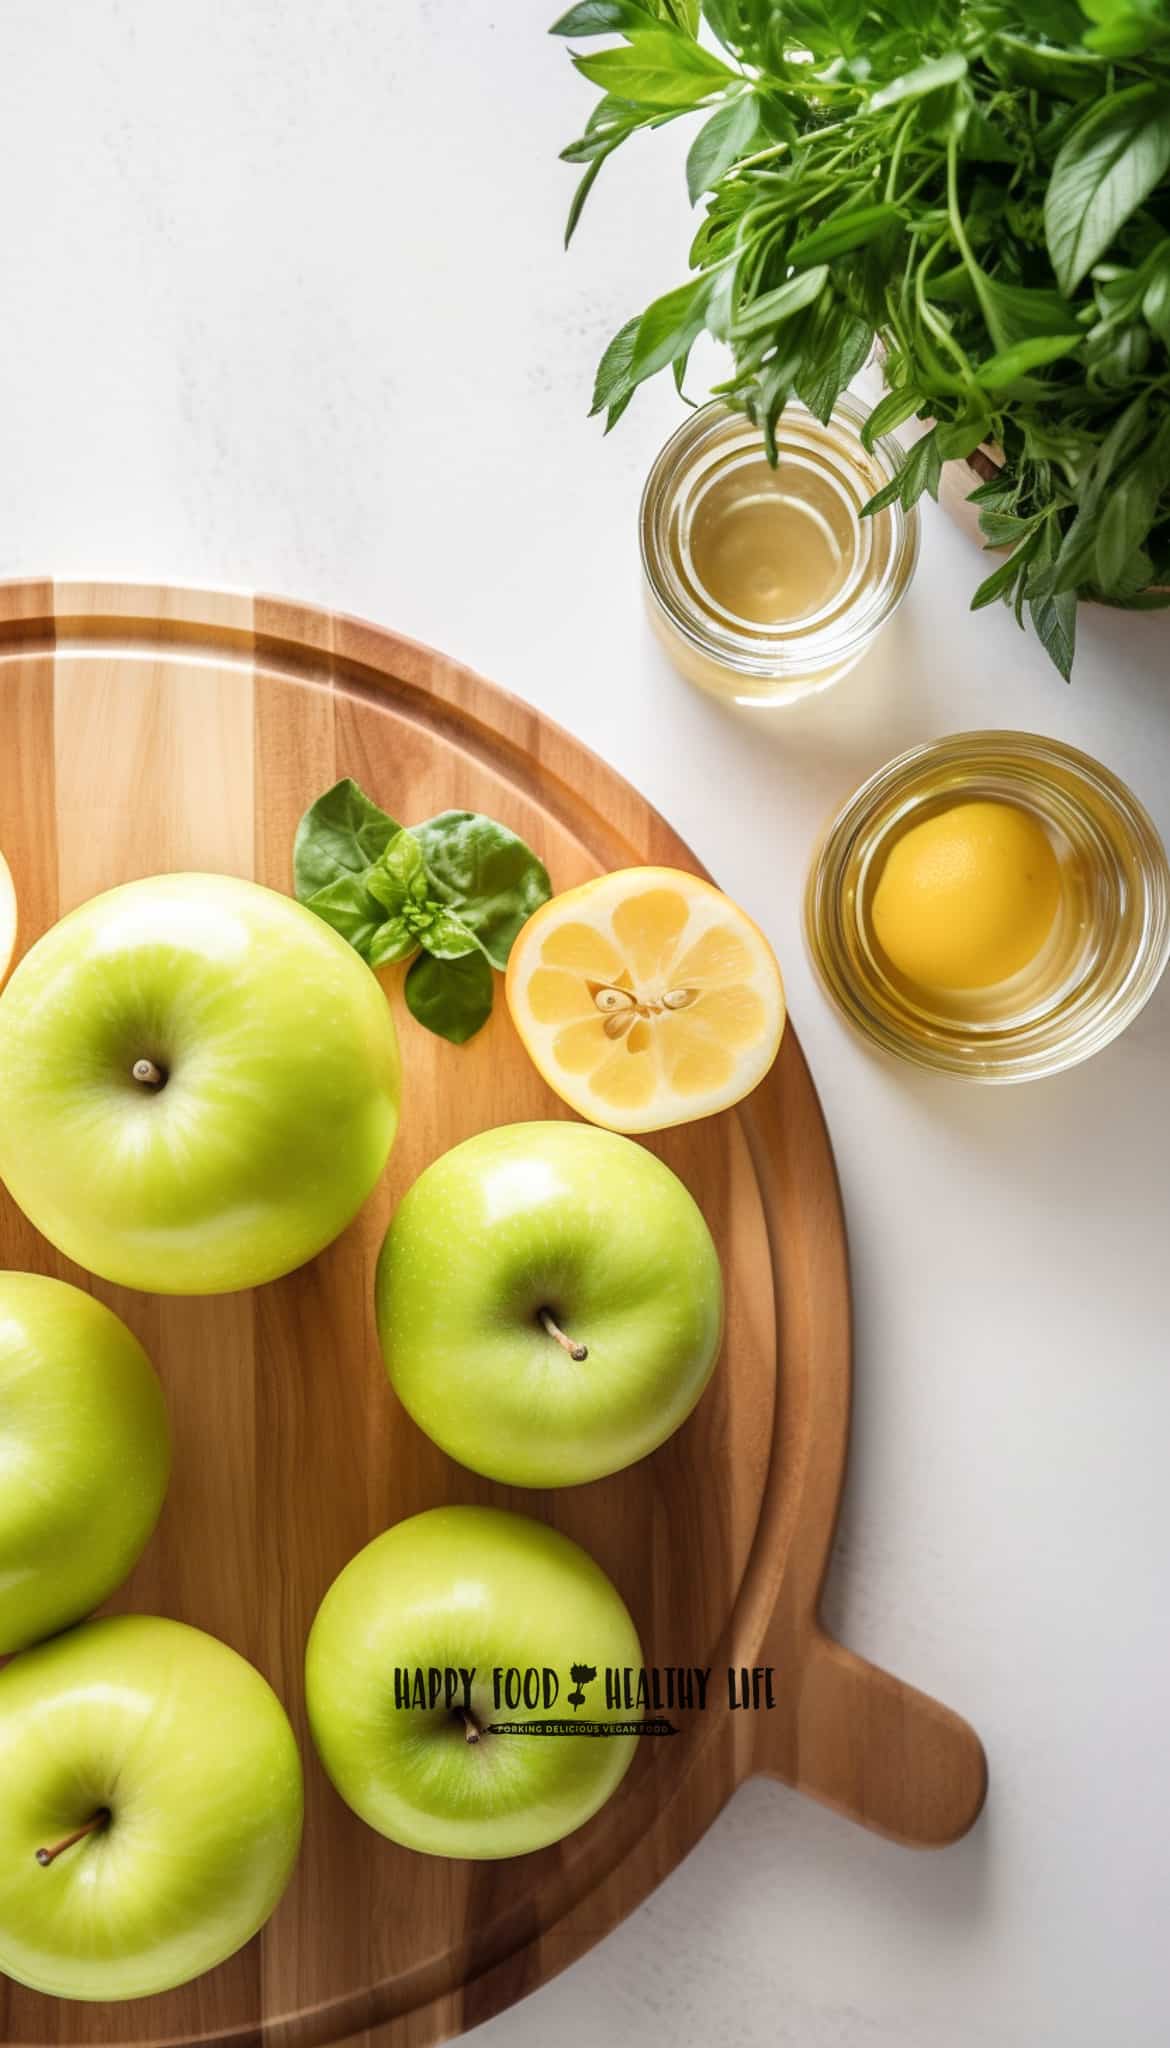 what background with butcher block round cutting board. Green apples on cutting board